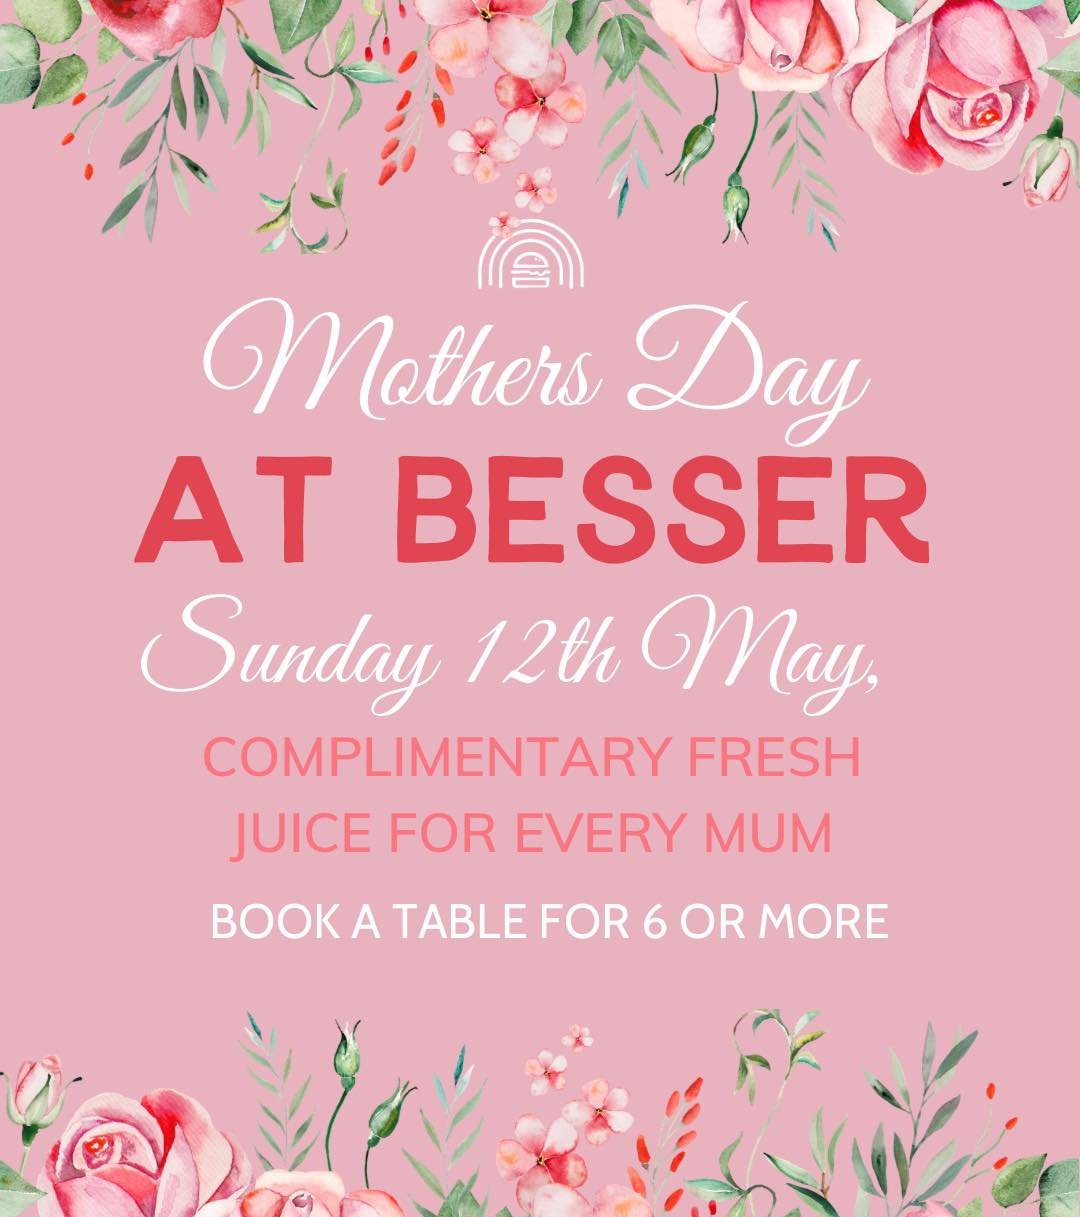 Celebrate Mother's Day with a special complimentary fresh juice for Mum on May 12th. 

Make a reservation now to treat your Mum! Because Mum deserves besser! 🌈